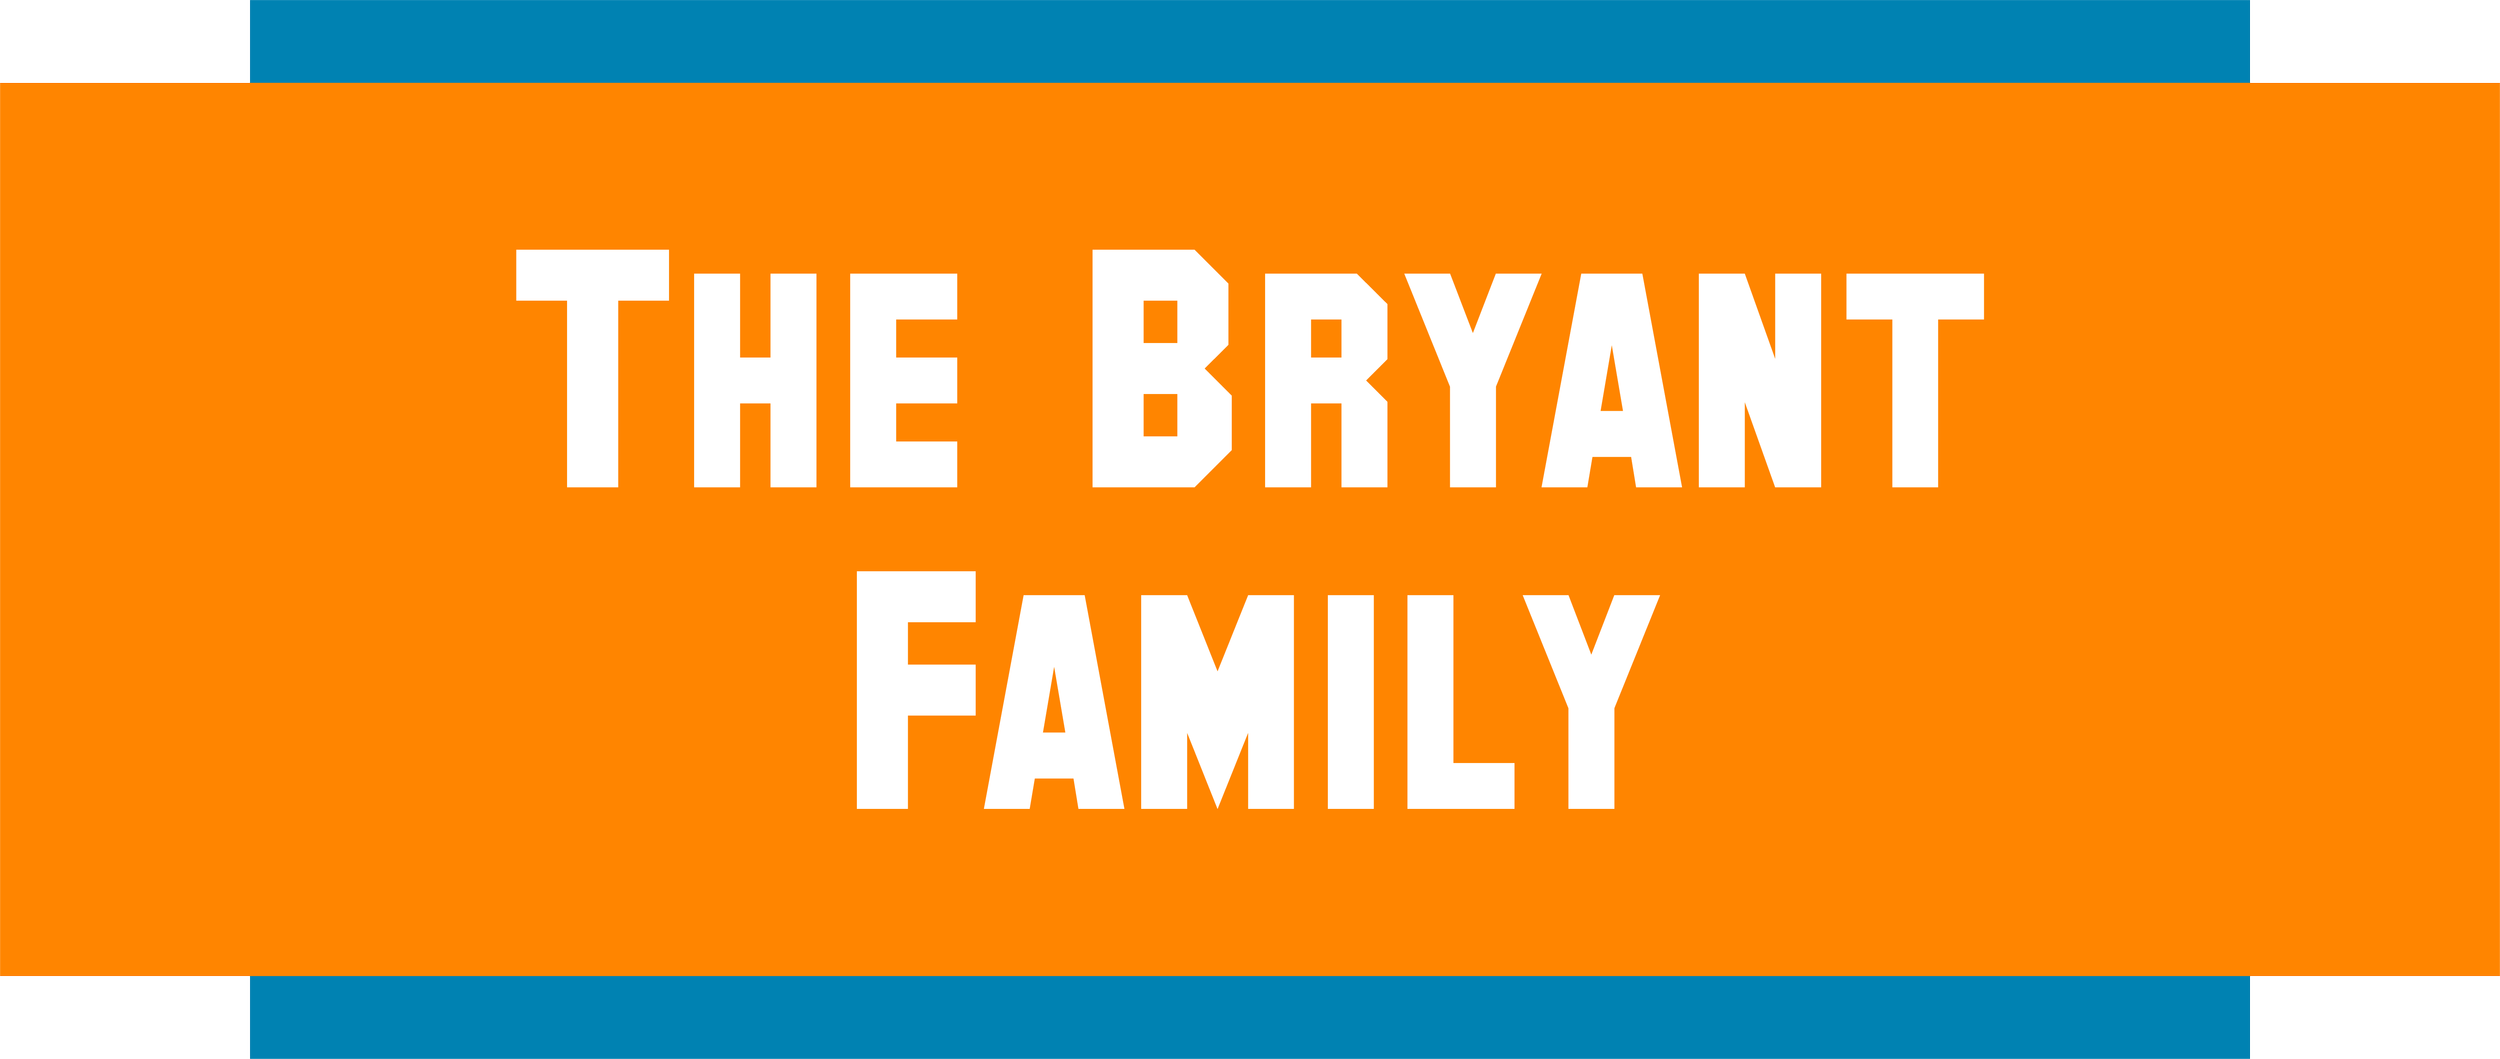 The Bryant Family.png